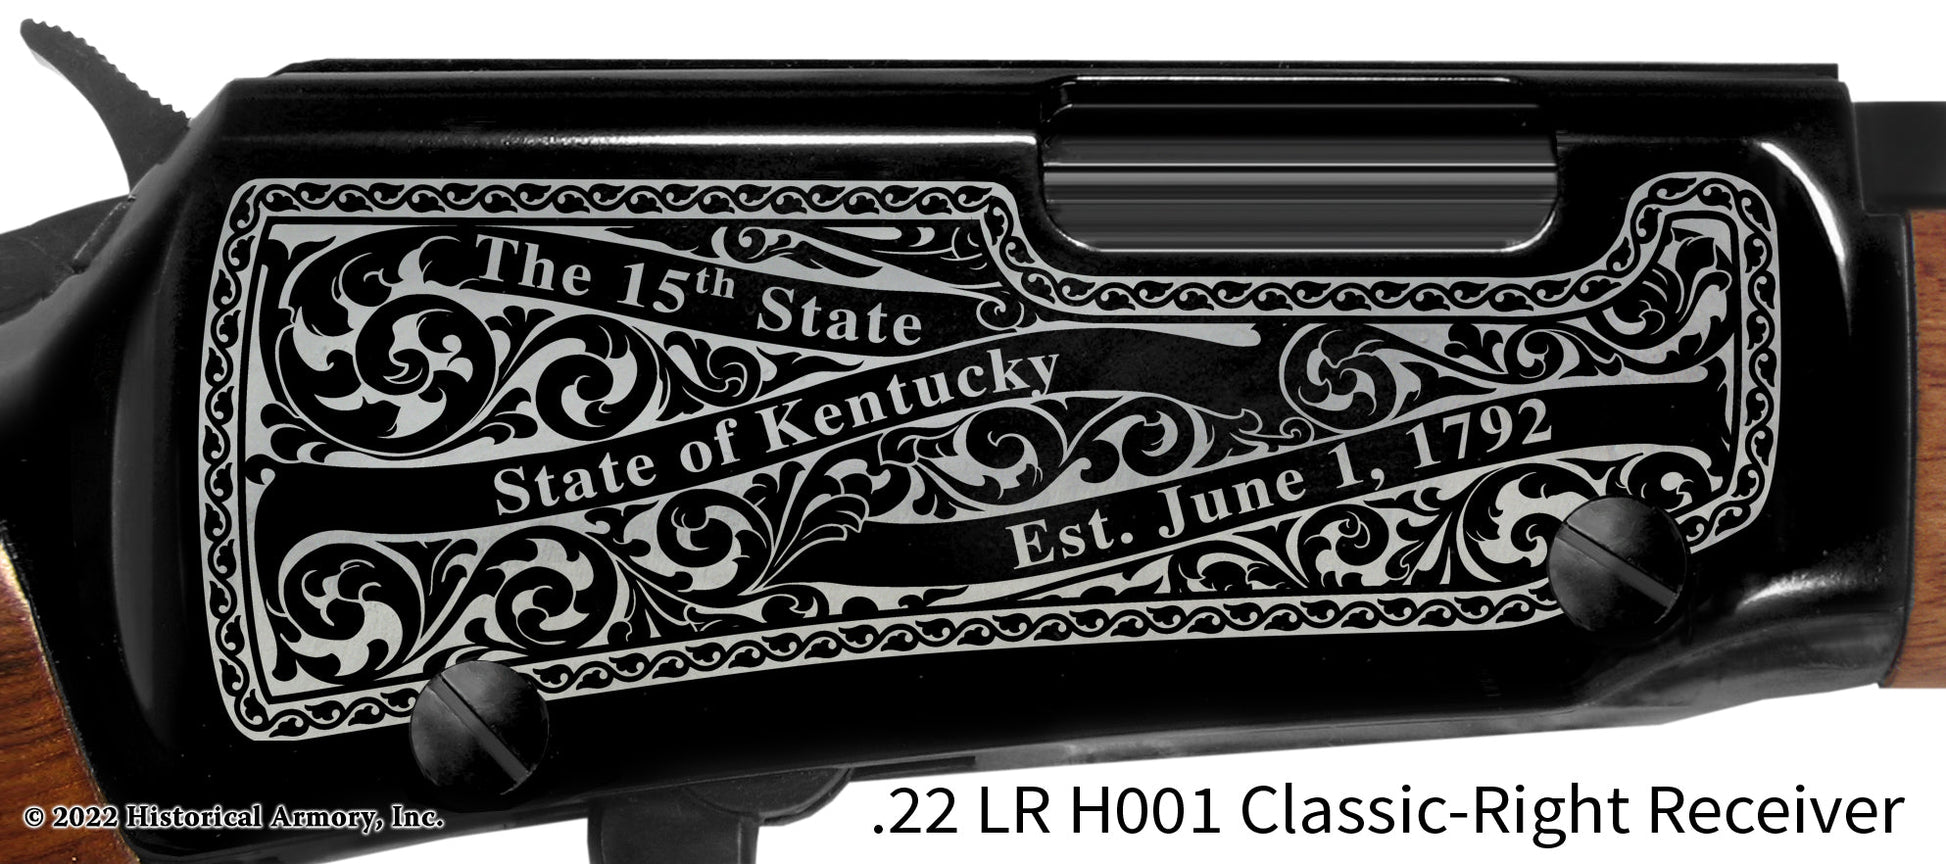 Shelby County Kentucky Engraved Henry H001 Rifle